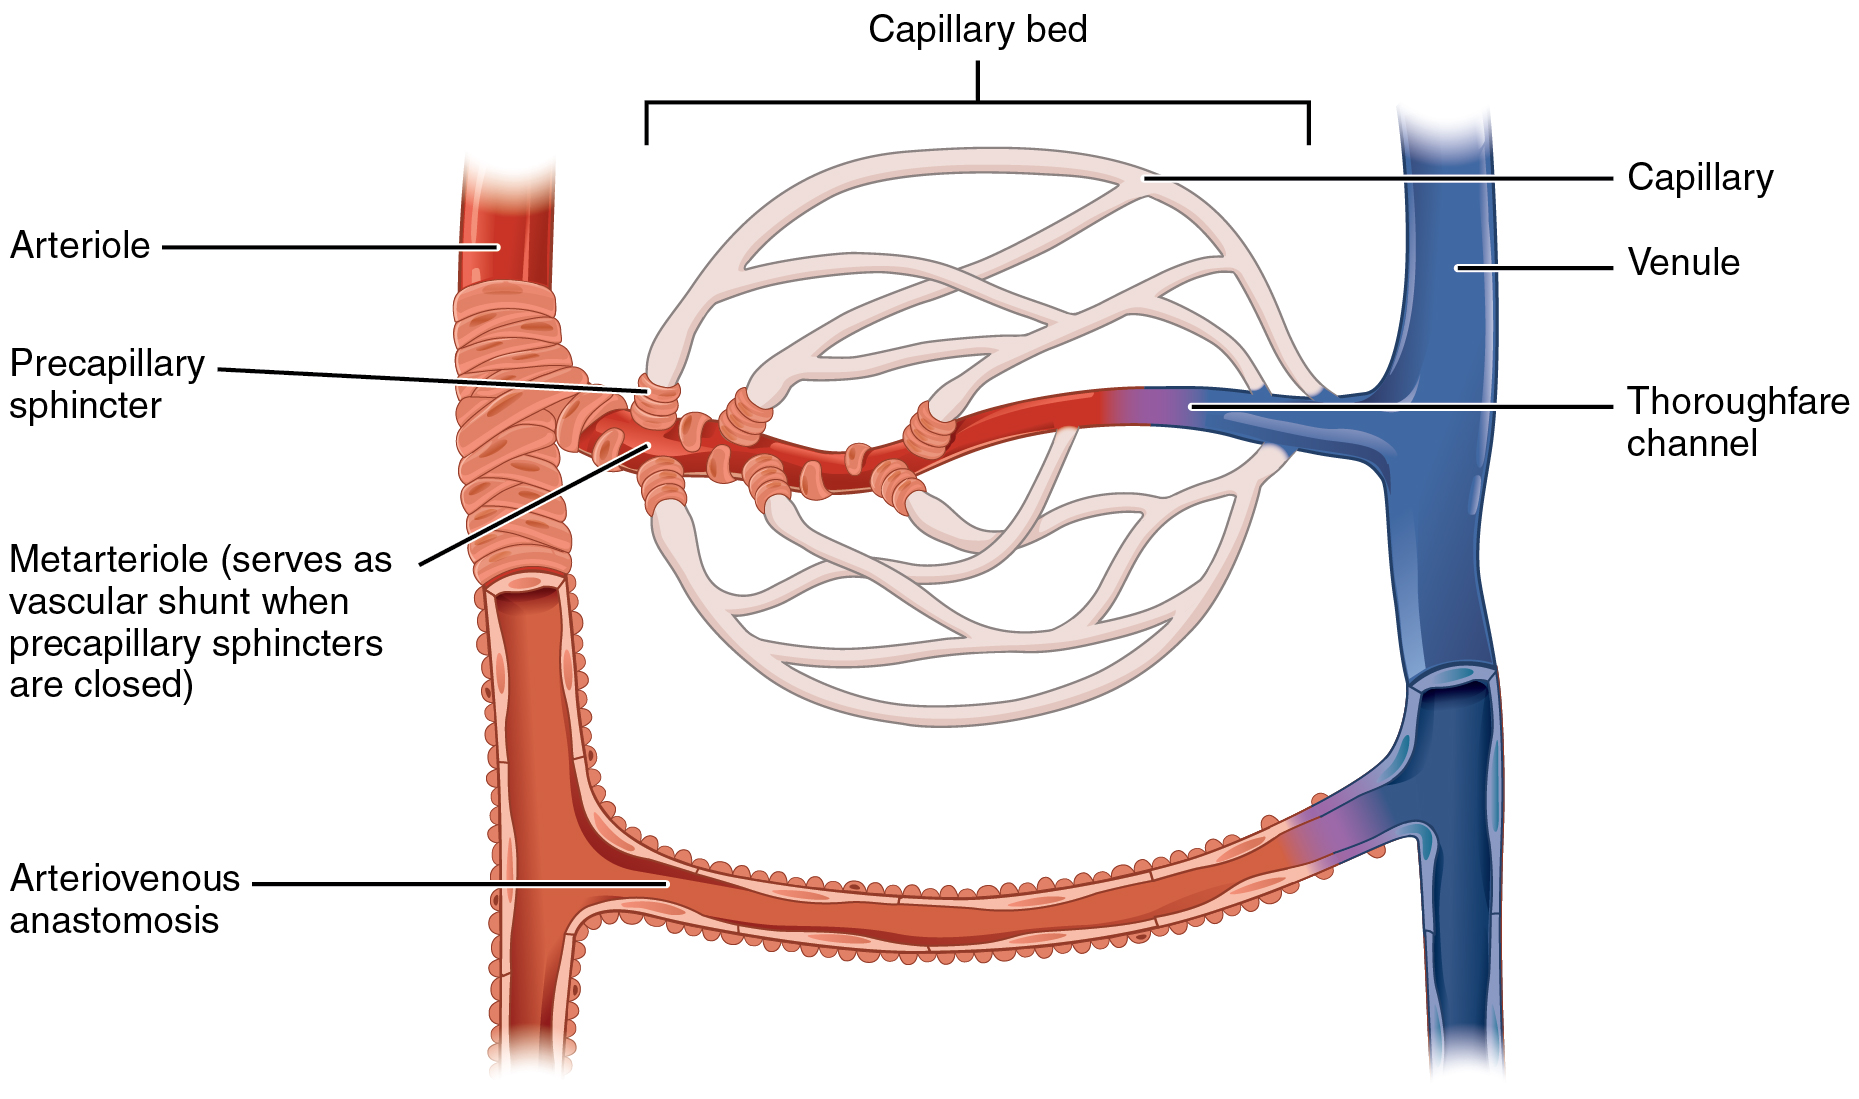 Anatomy of a Capillary Bed